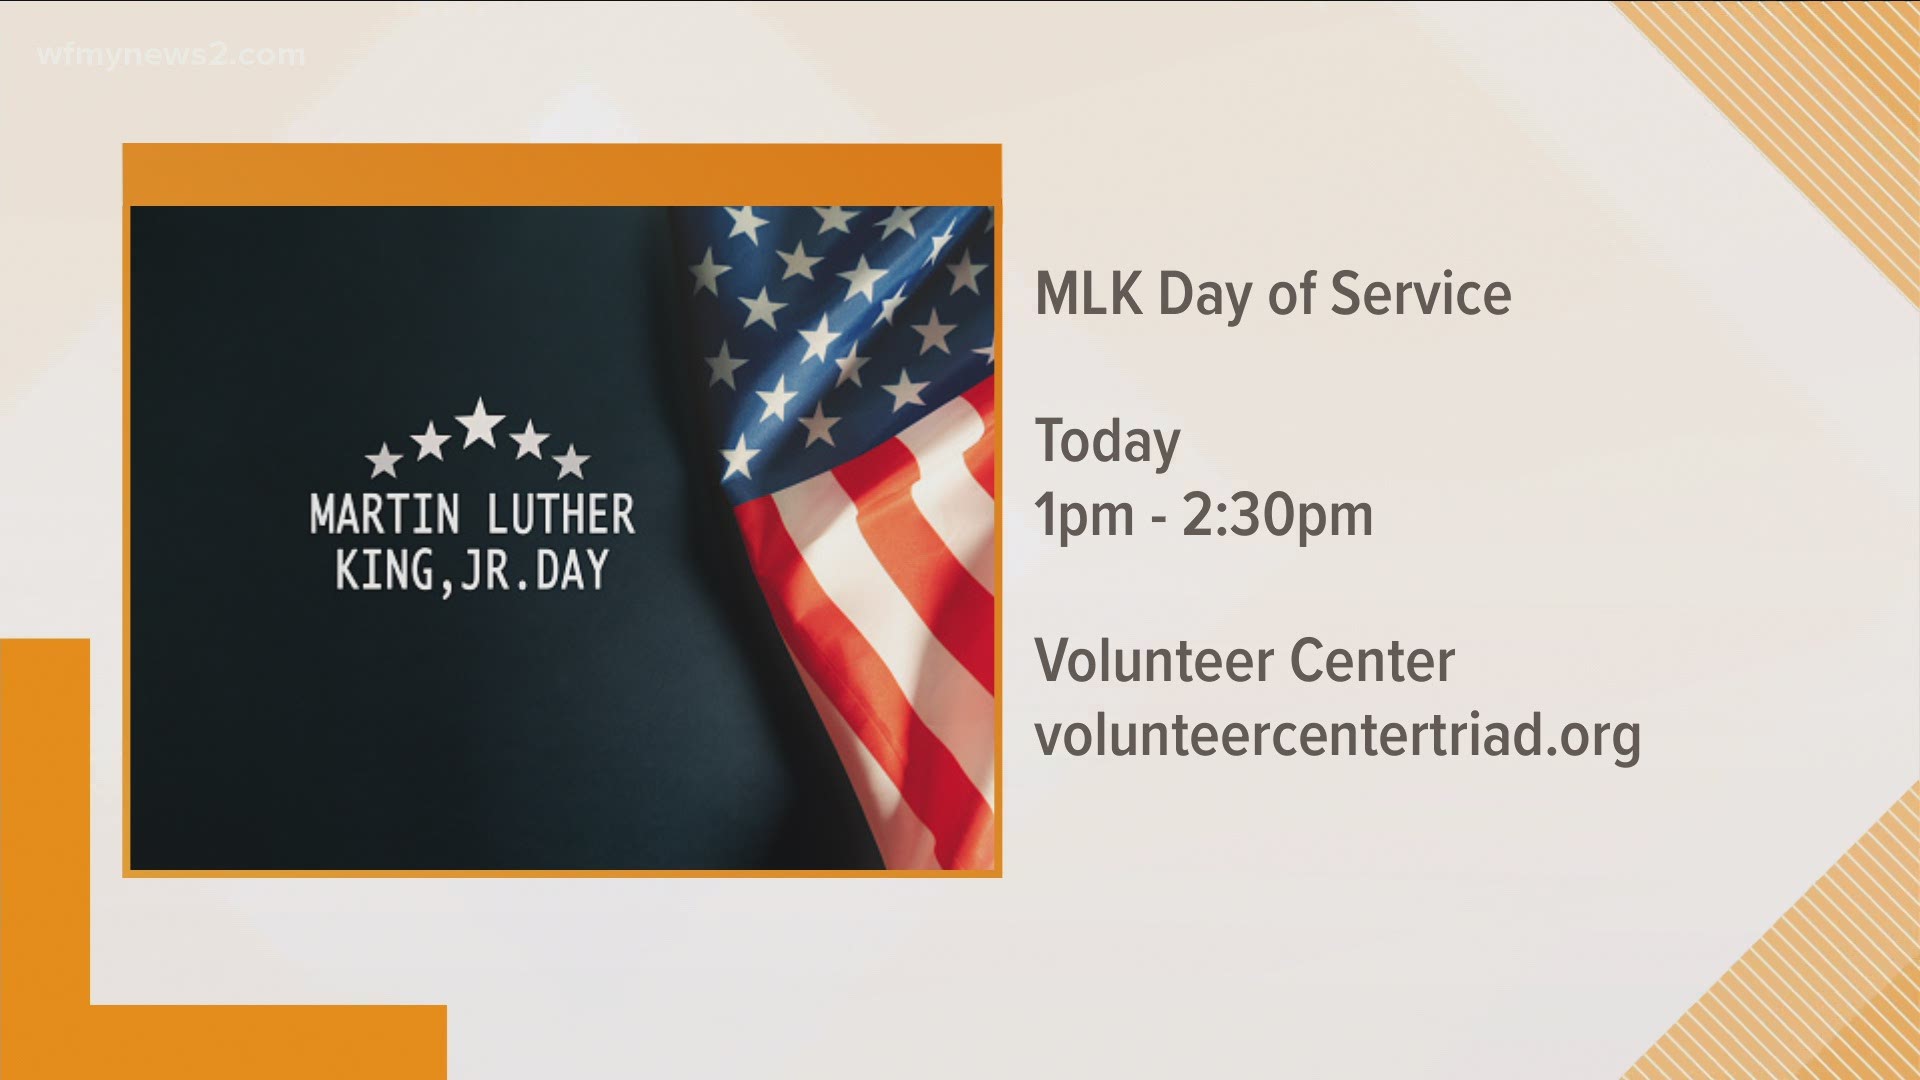 The Volunteer Center will hold a virtual MLK Day event on Monday from 1:00 p.m. - 2:30 p.m.